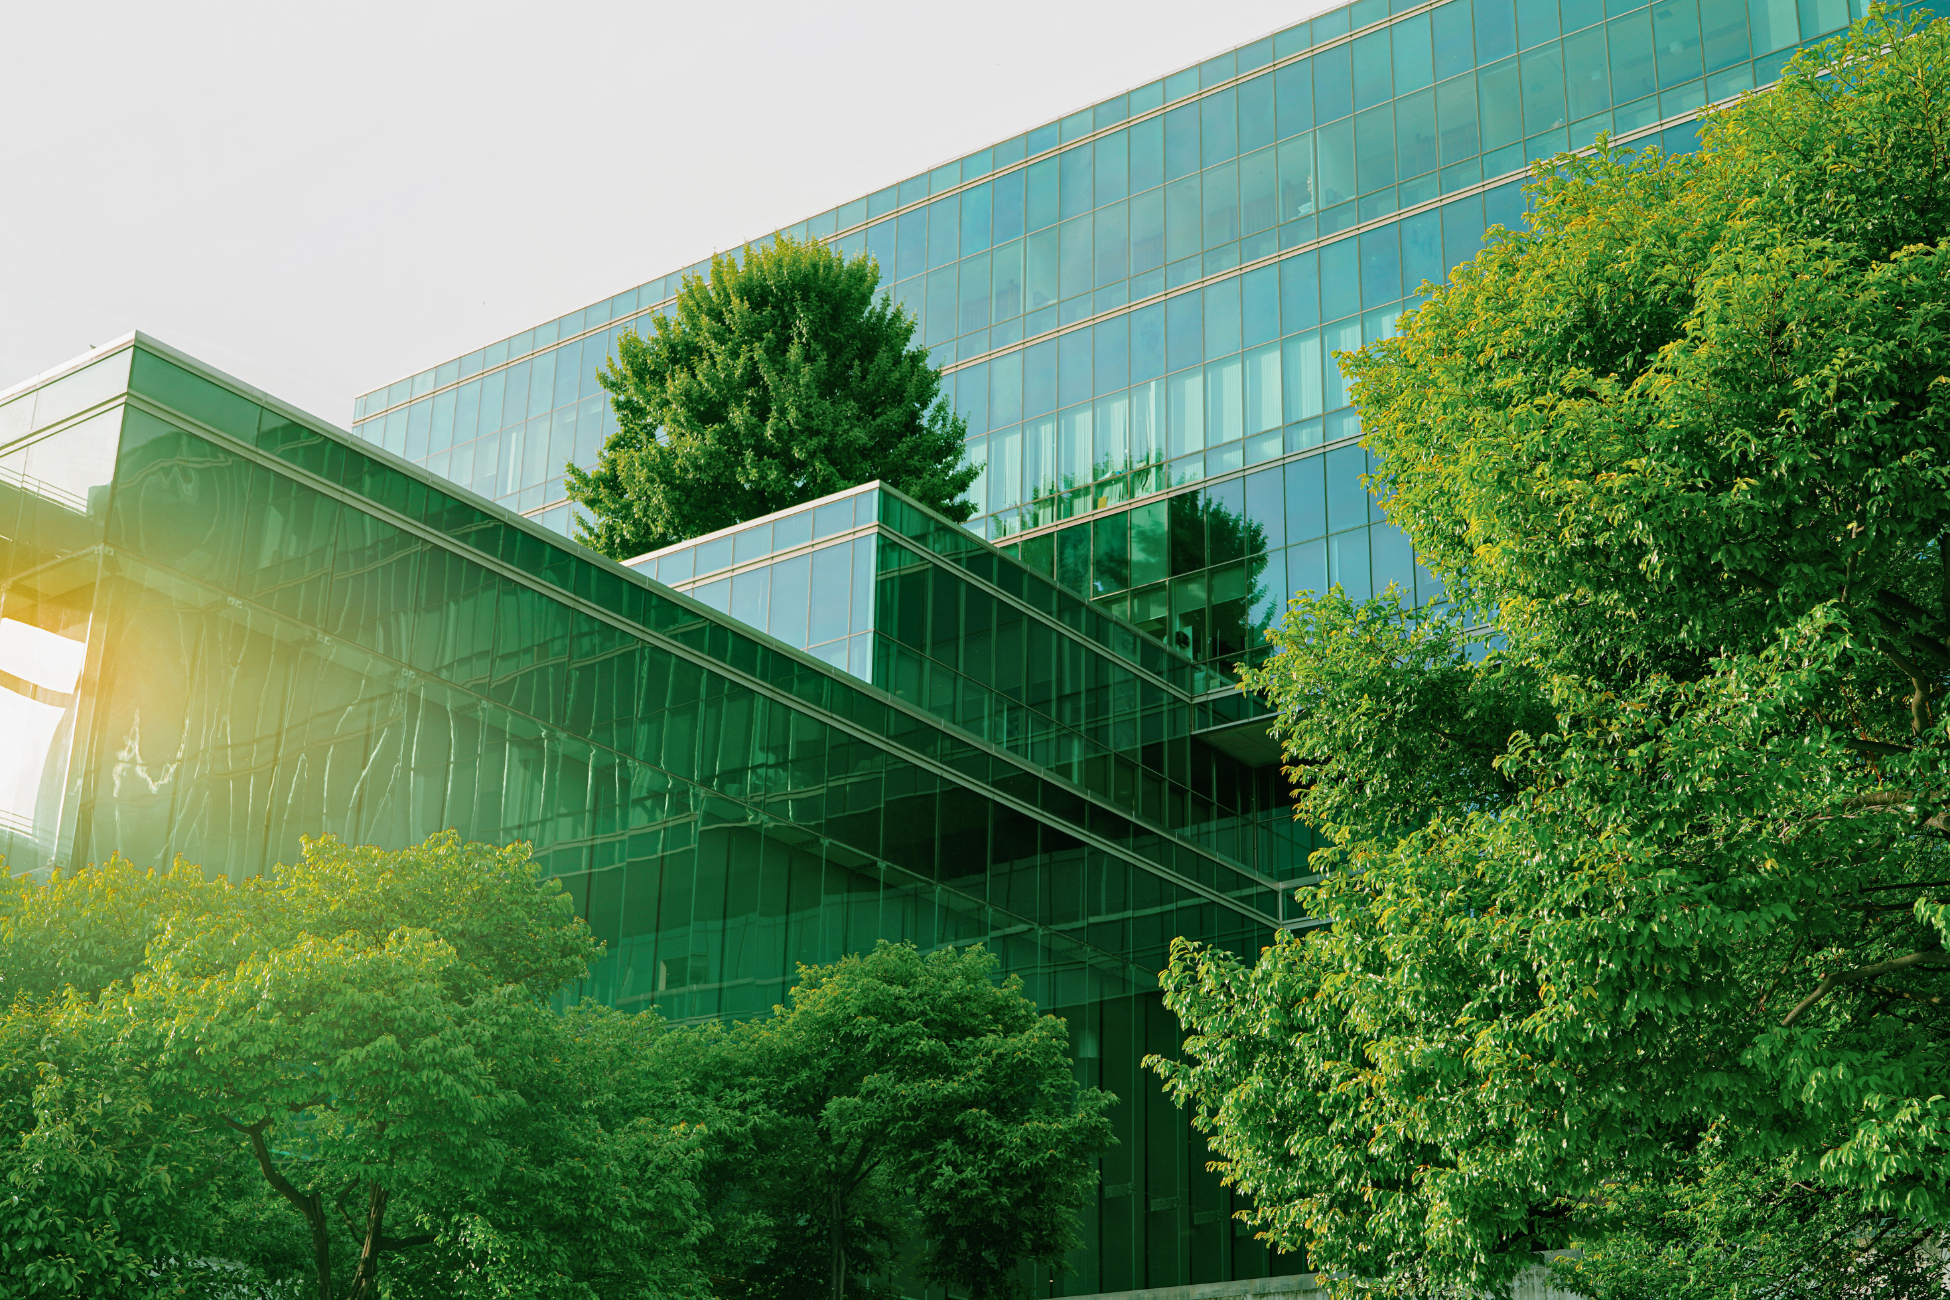 A large corporate building made entirely of glass is surrounded by lush, green trees, which are also reflecting off of the building’s windows.